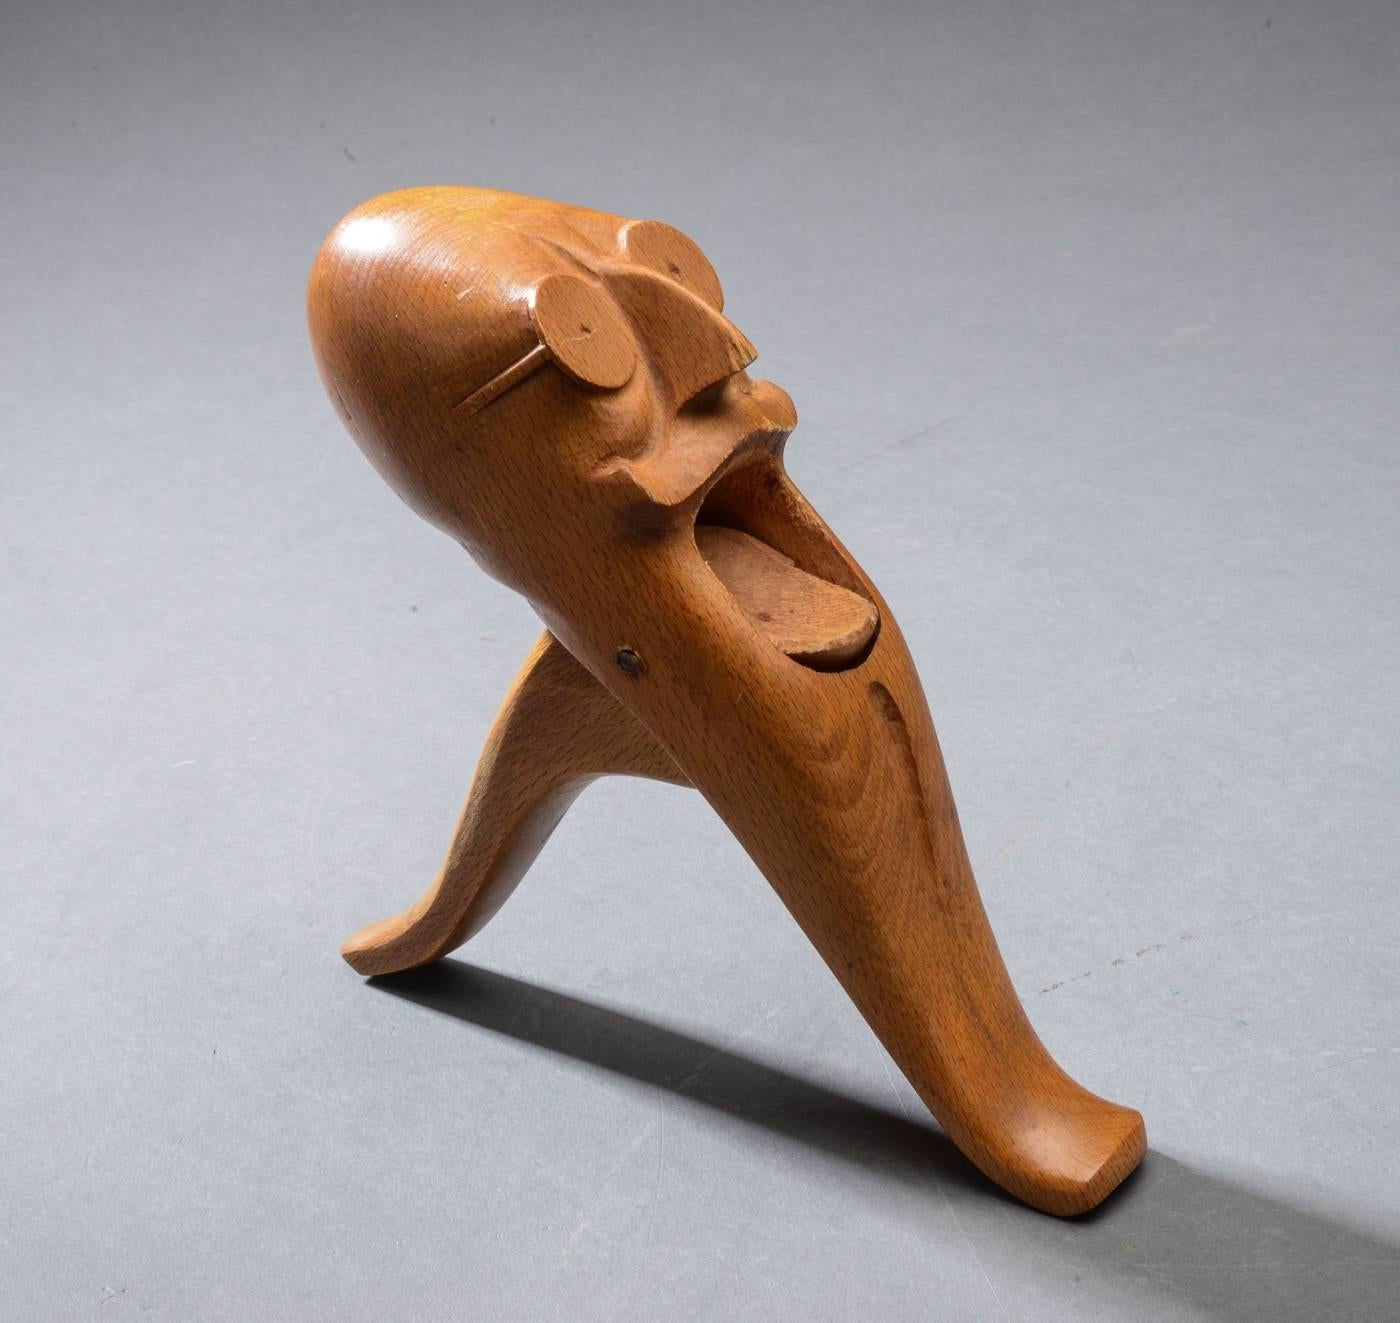 A rare stamped nutcracker representing the Prime Minister Thorvald Stauning by Kay Bojesen in sculpted beech made by Kay Bojesen.